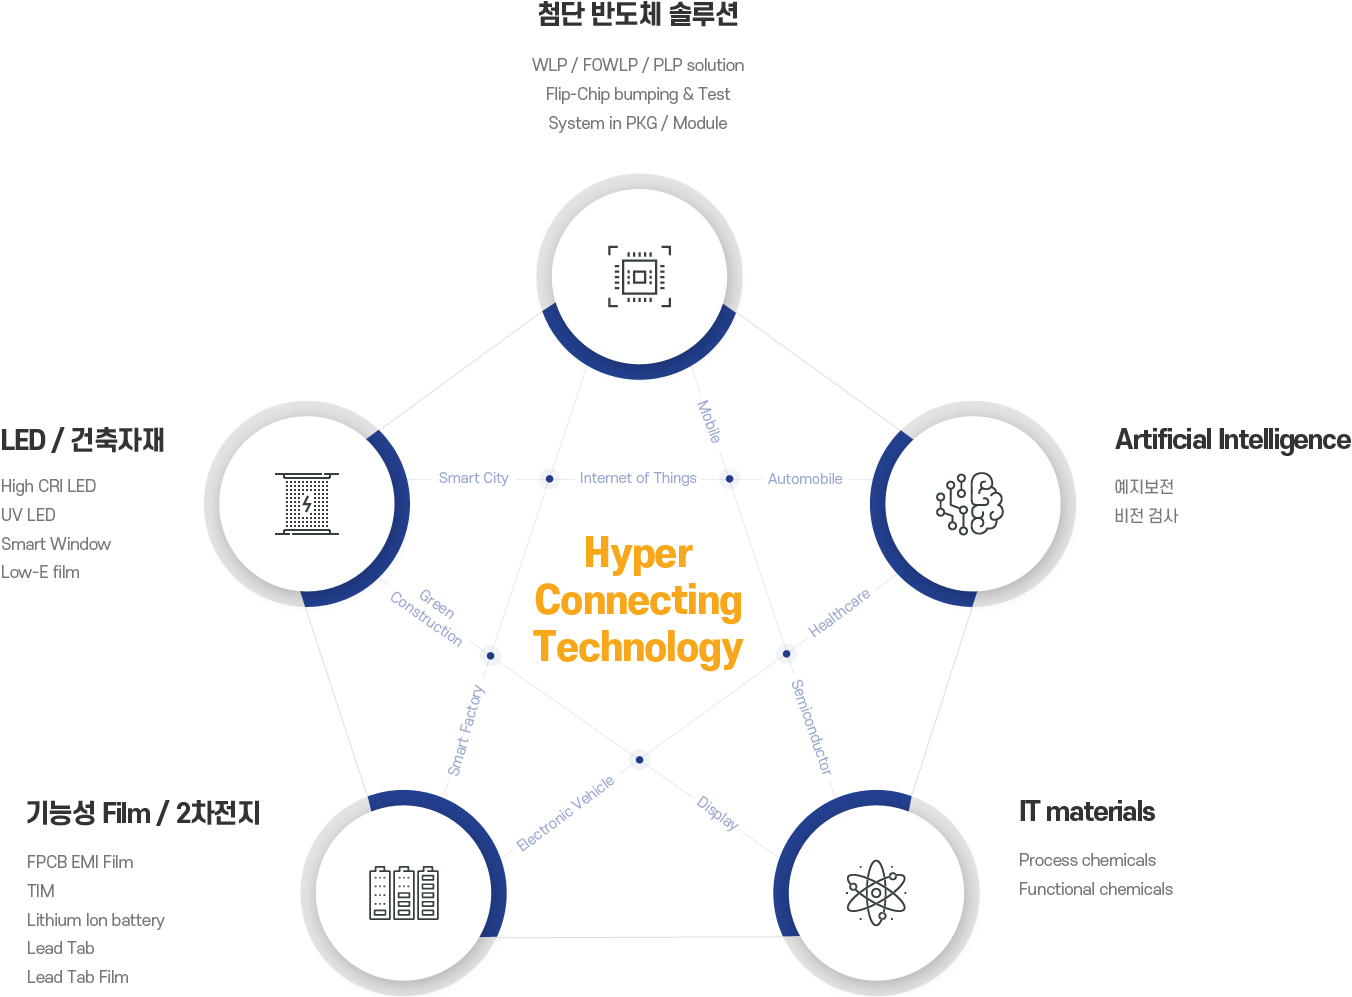 Hyper Connecting Technology image